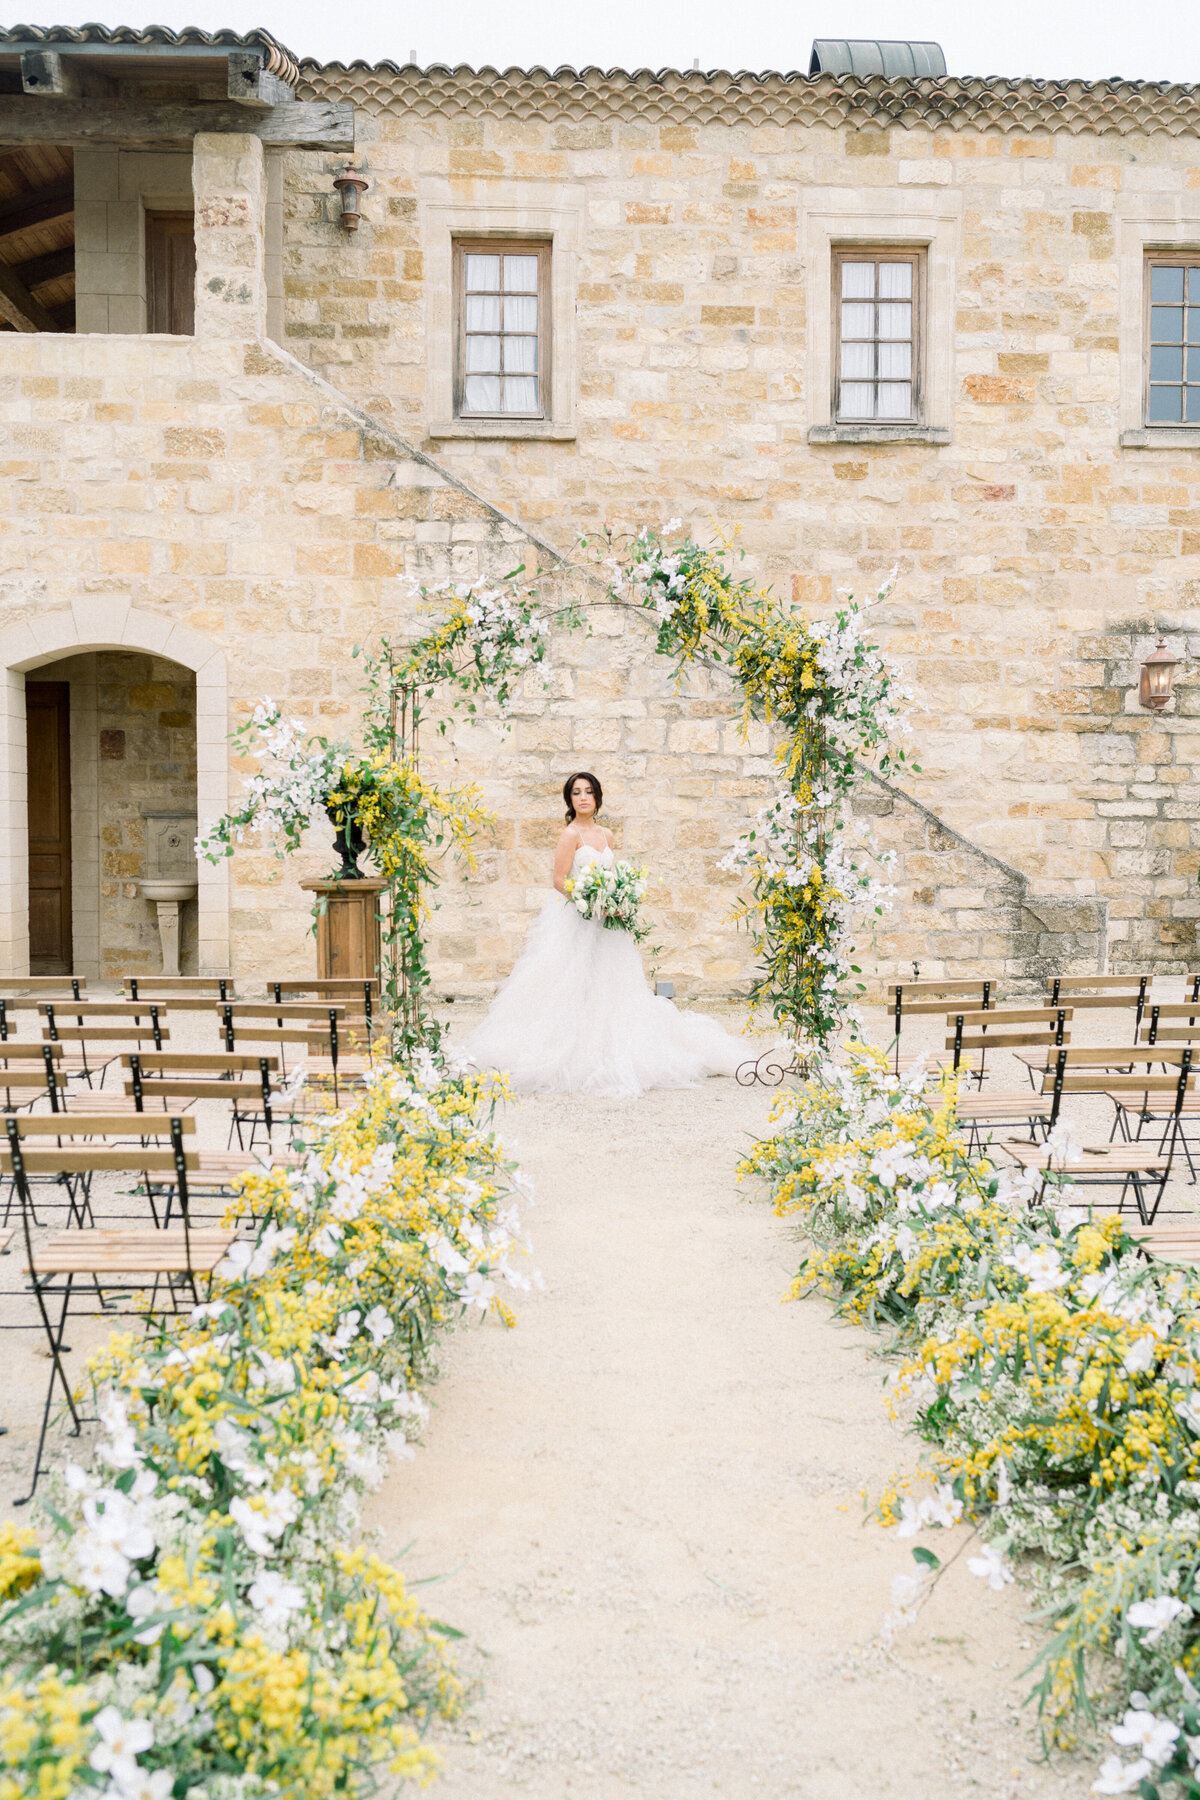 Bride at ceremony flower arch at Sunstone Winery in Santa Ynez, CA